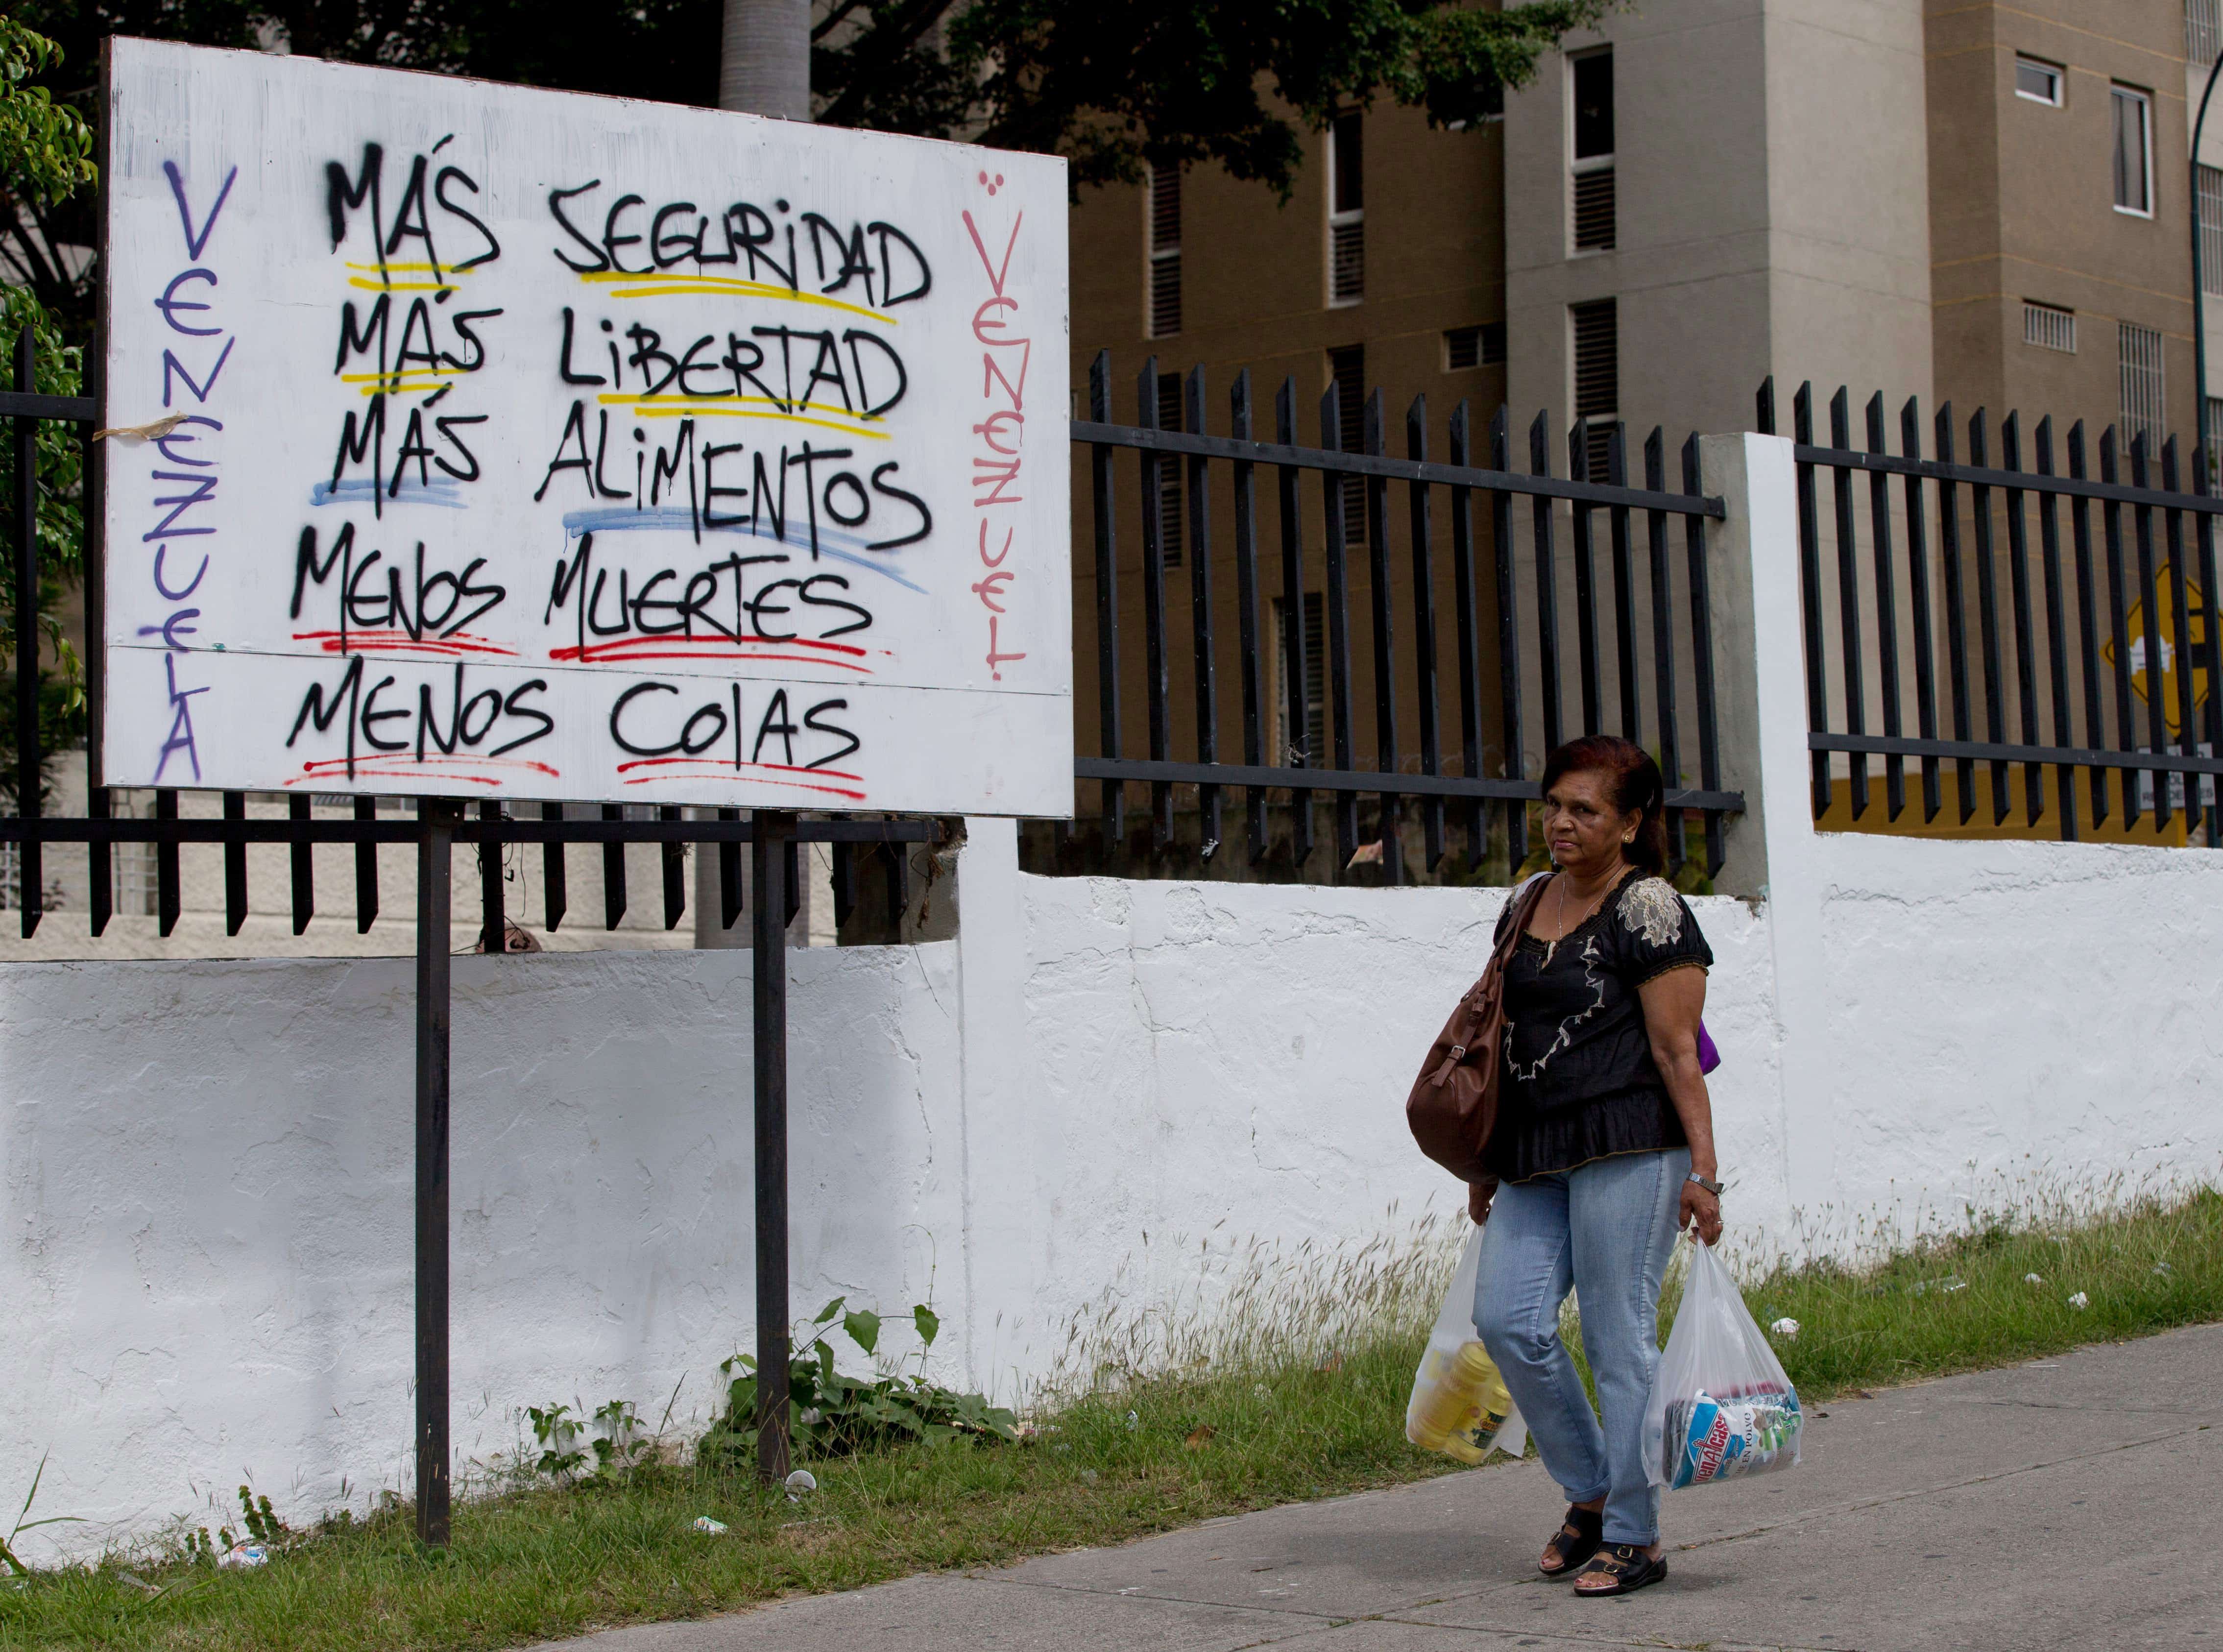 A woman walks by a poster that says "Venezuela, more security, more freedom, more food, fewer deaths, fewer lines" in Caracas, AP Photo/Fernando Llano